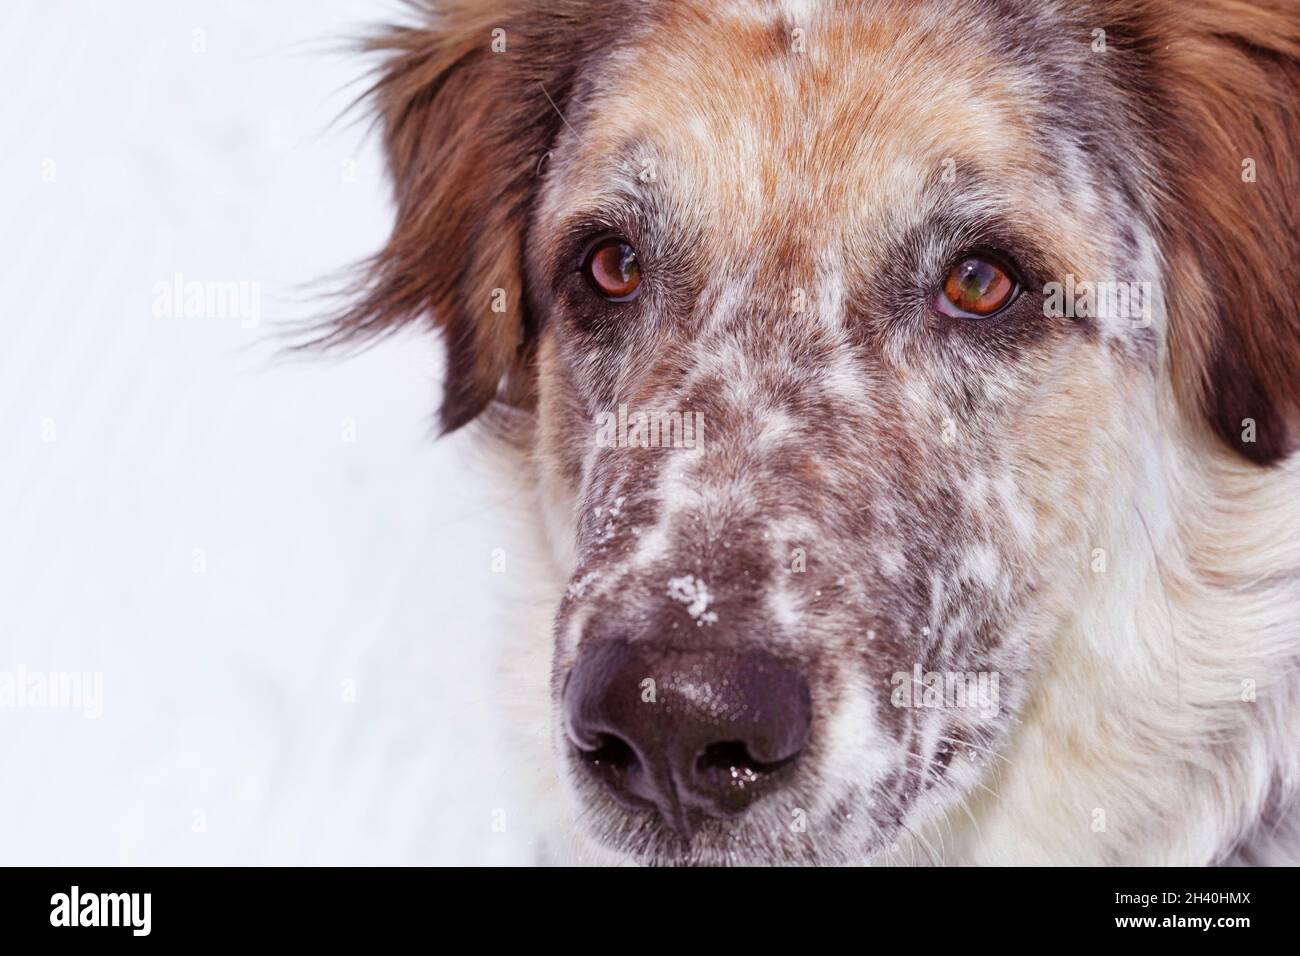 Attentive looking up dog, portrait Stock Photo